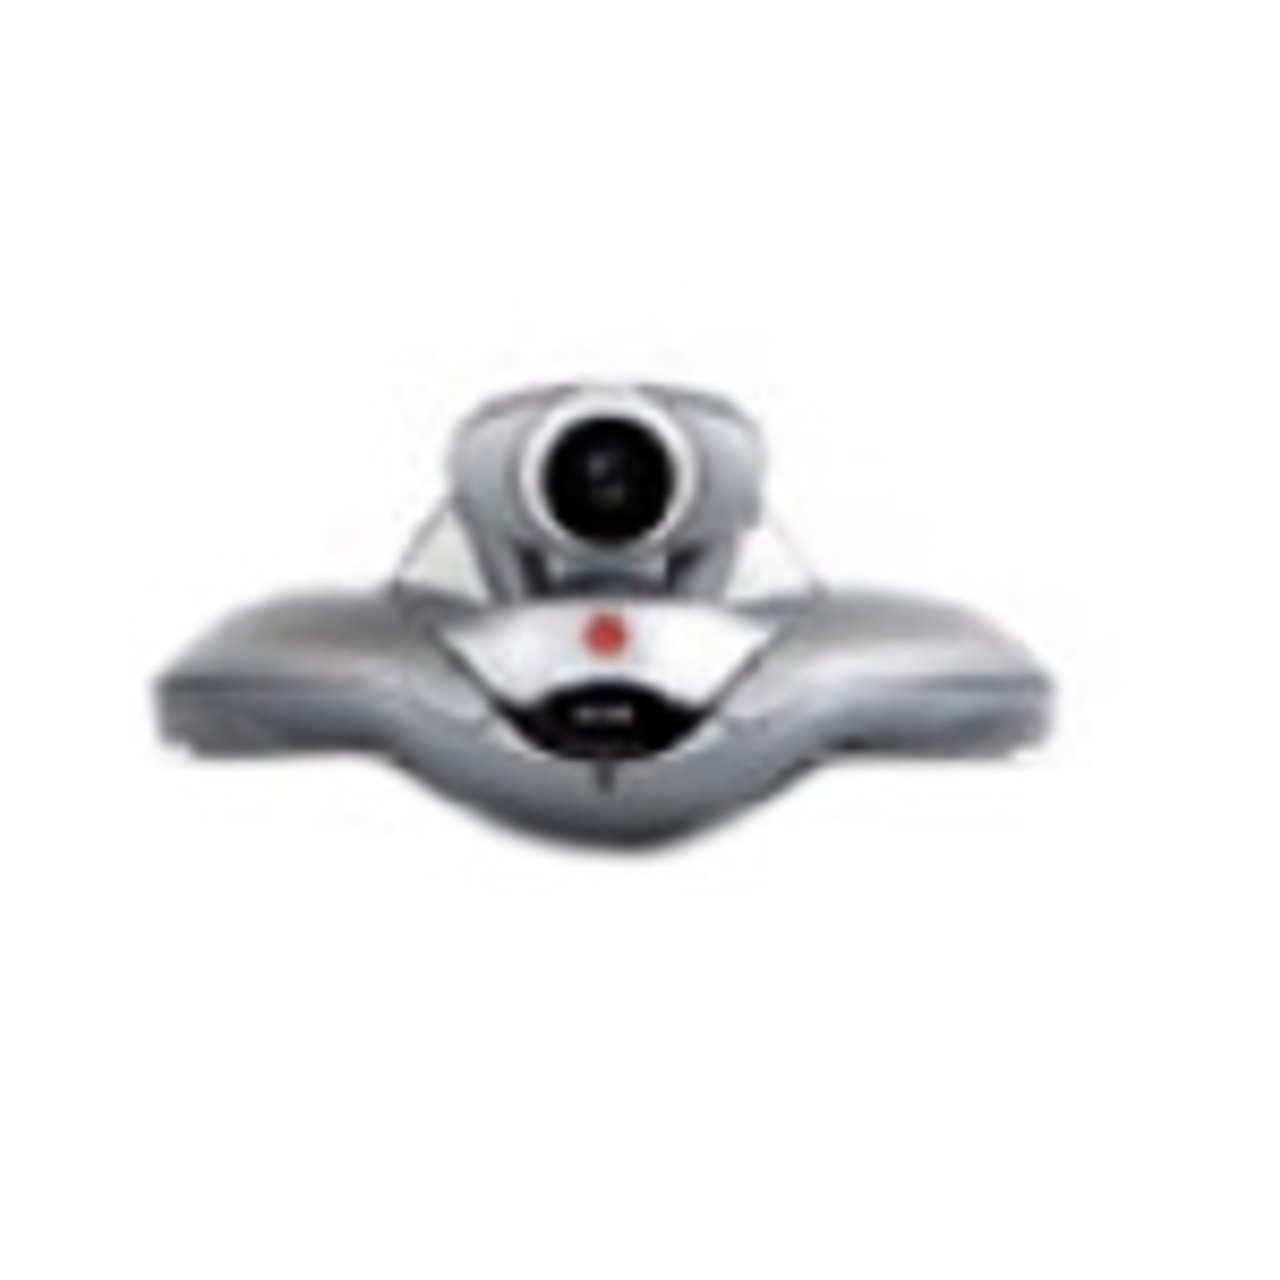 7200-22730-001 Polycom VSX 7400e Presenter Video Conferencing Equipment 2Mbps ISDN, 2Mbps Serial